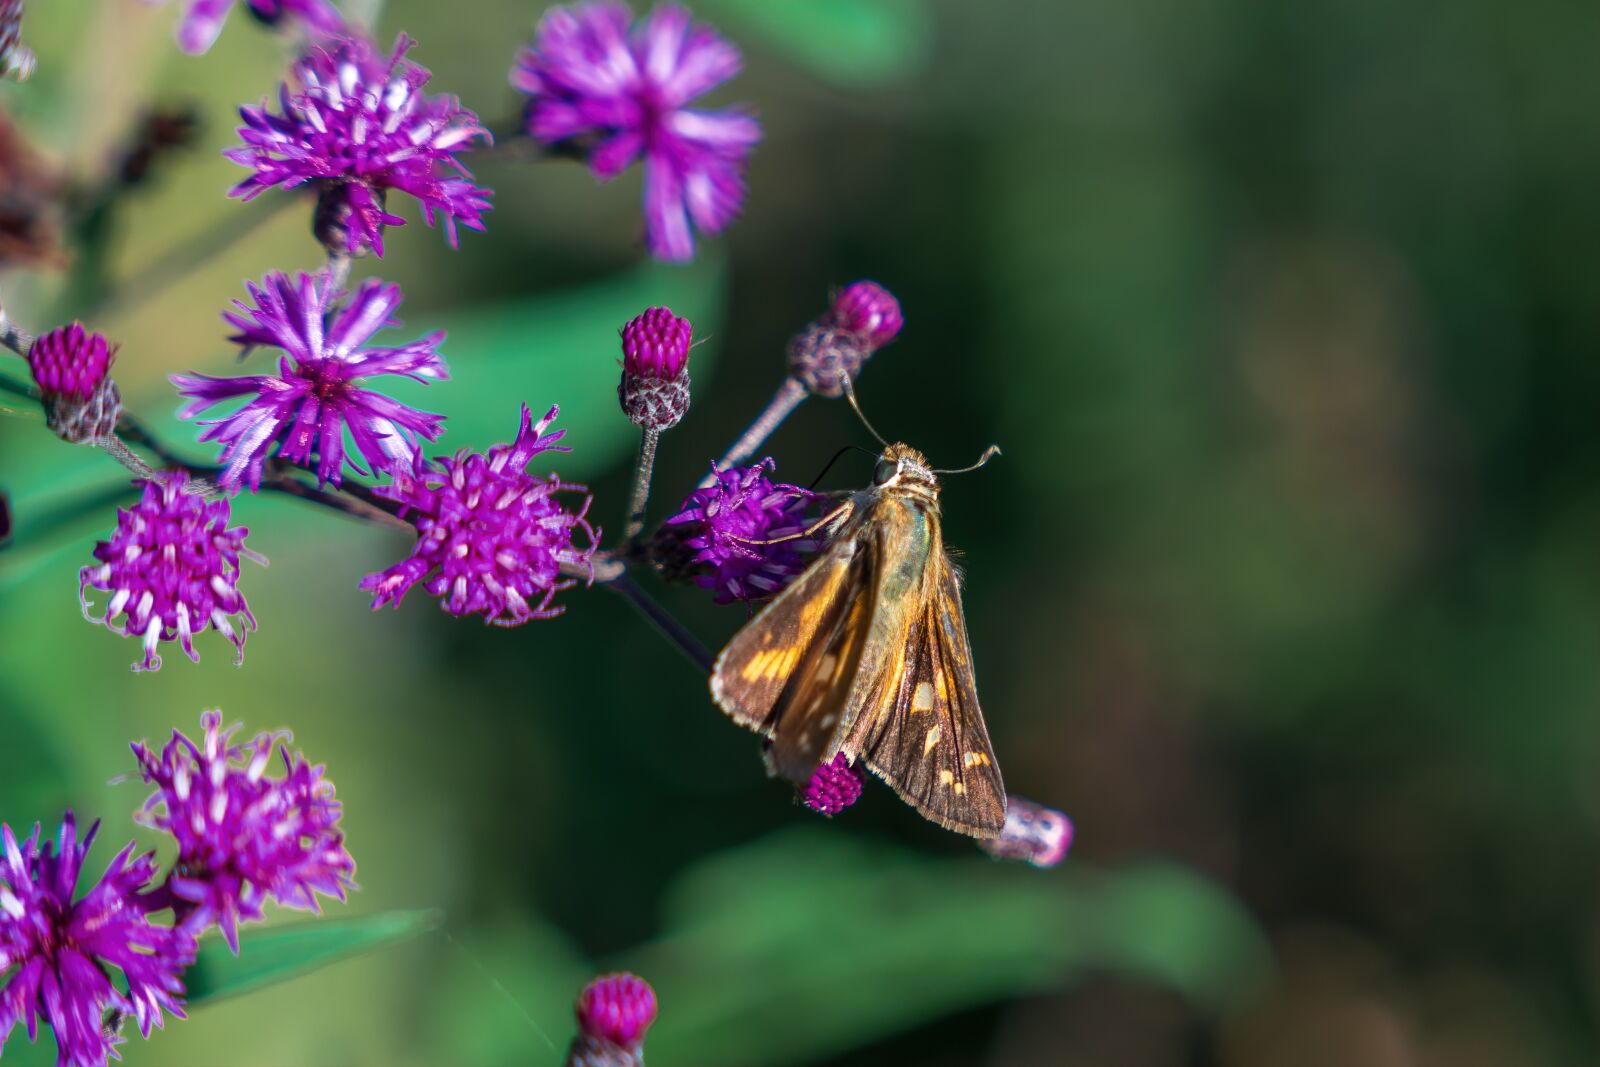 Sony a7R III sample photo. Butterfly, flowers, pollination photography